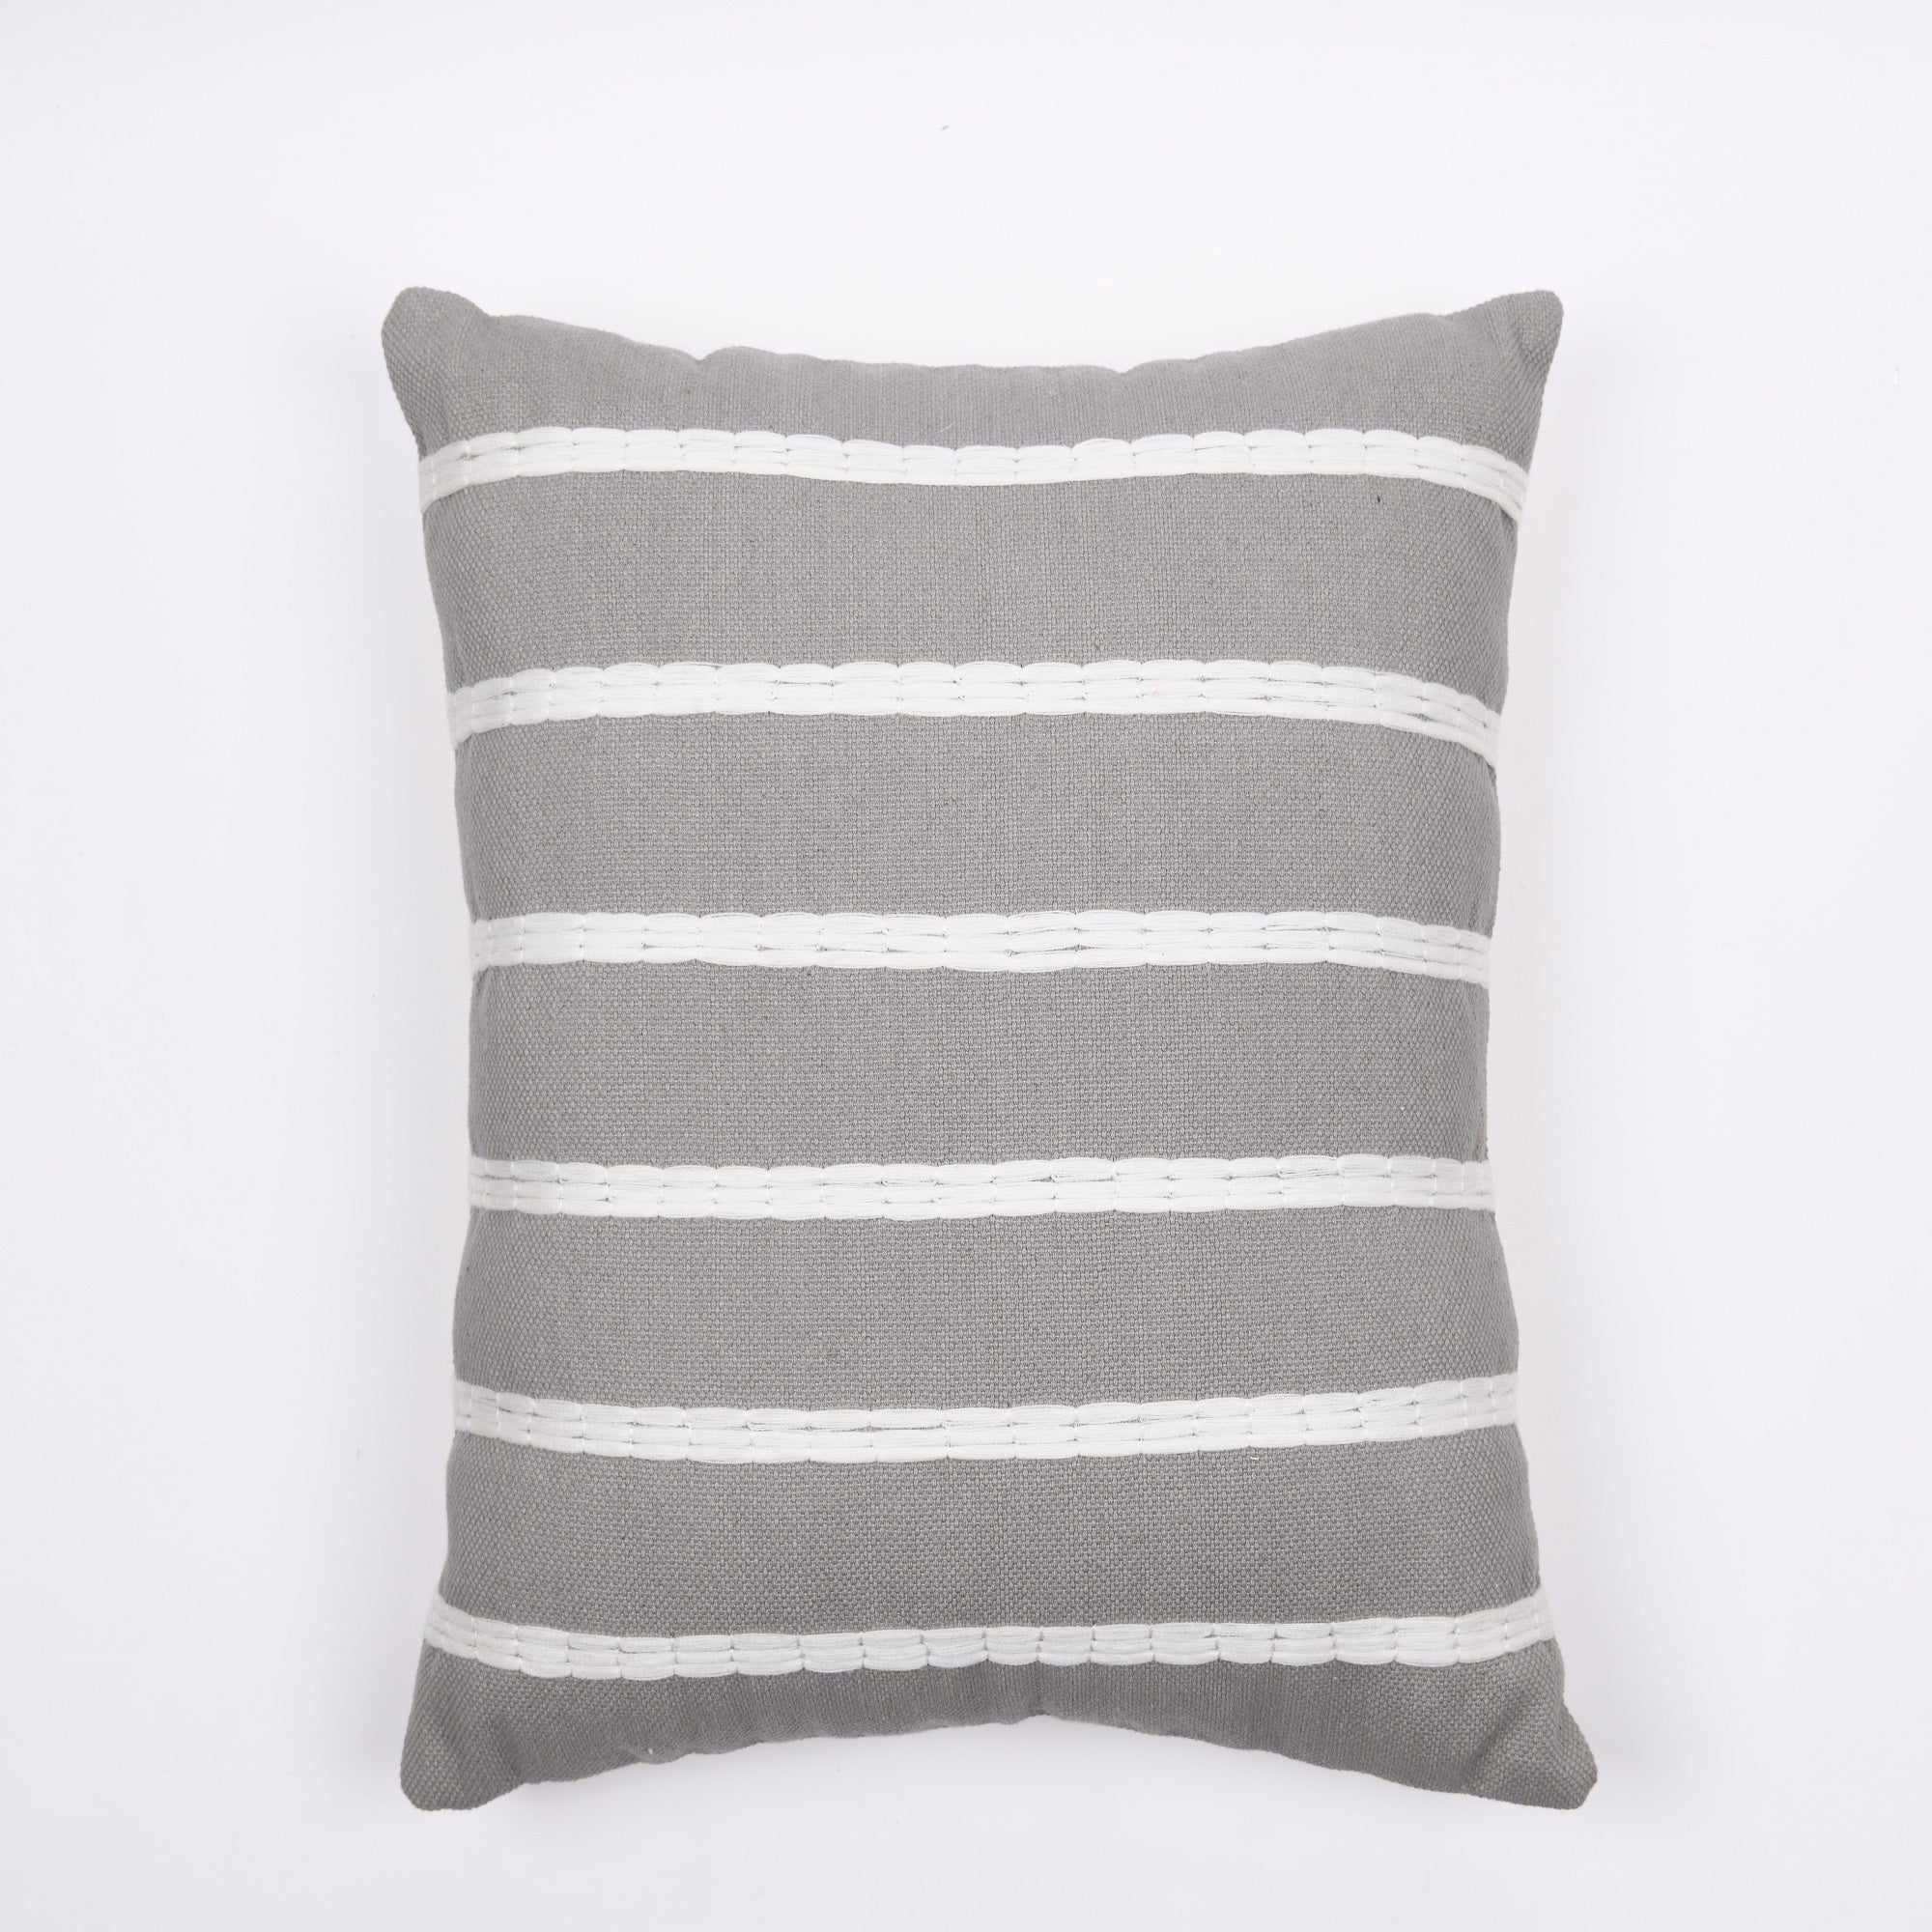 'Country Oasis' Hand-Woven Cotton Wool Cushion Cover